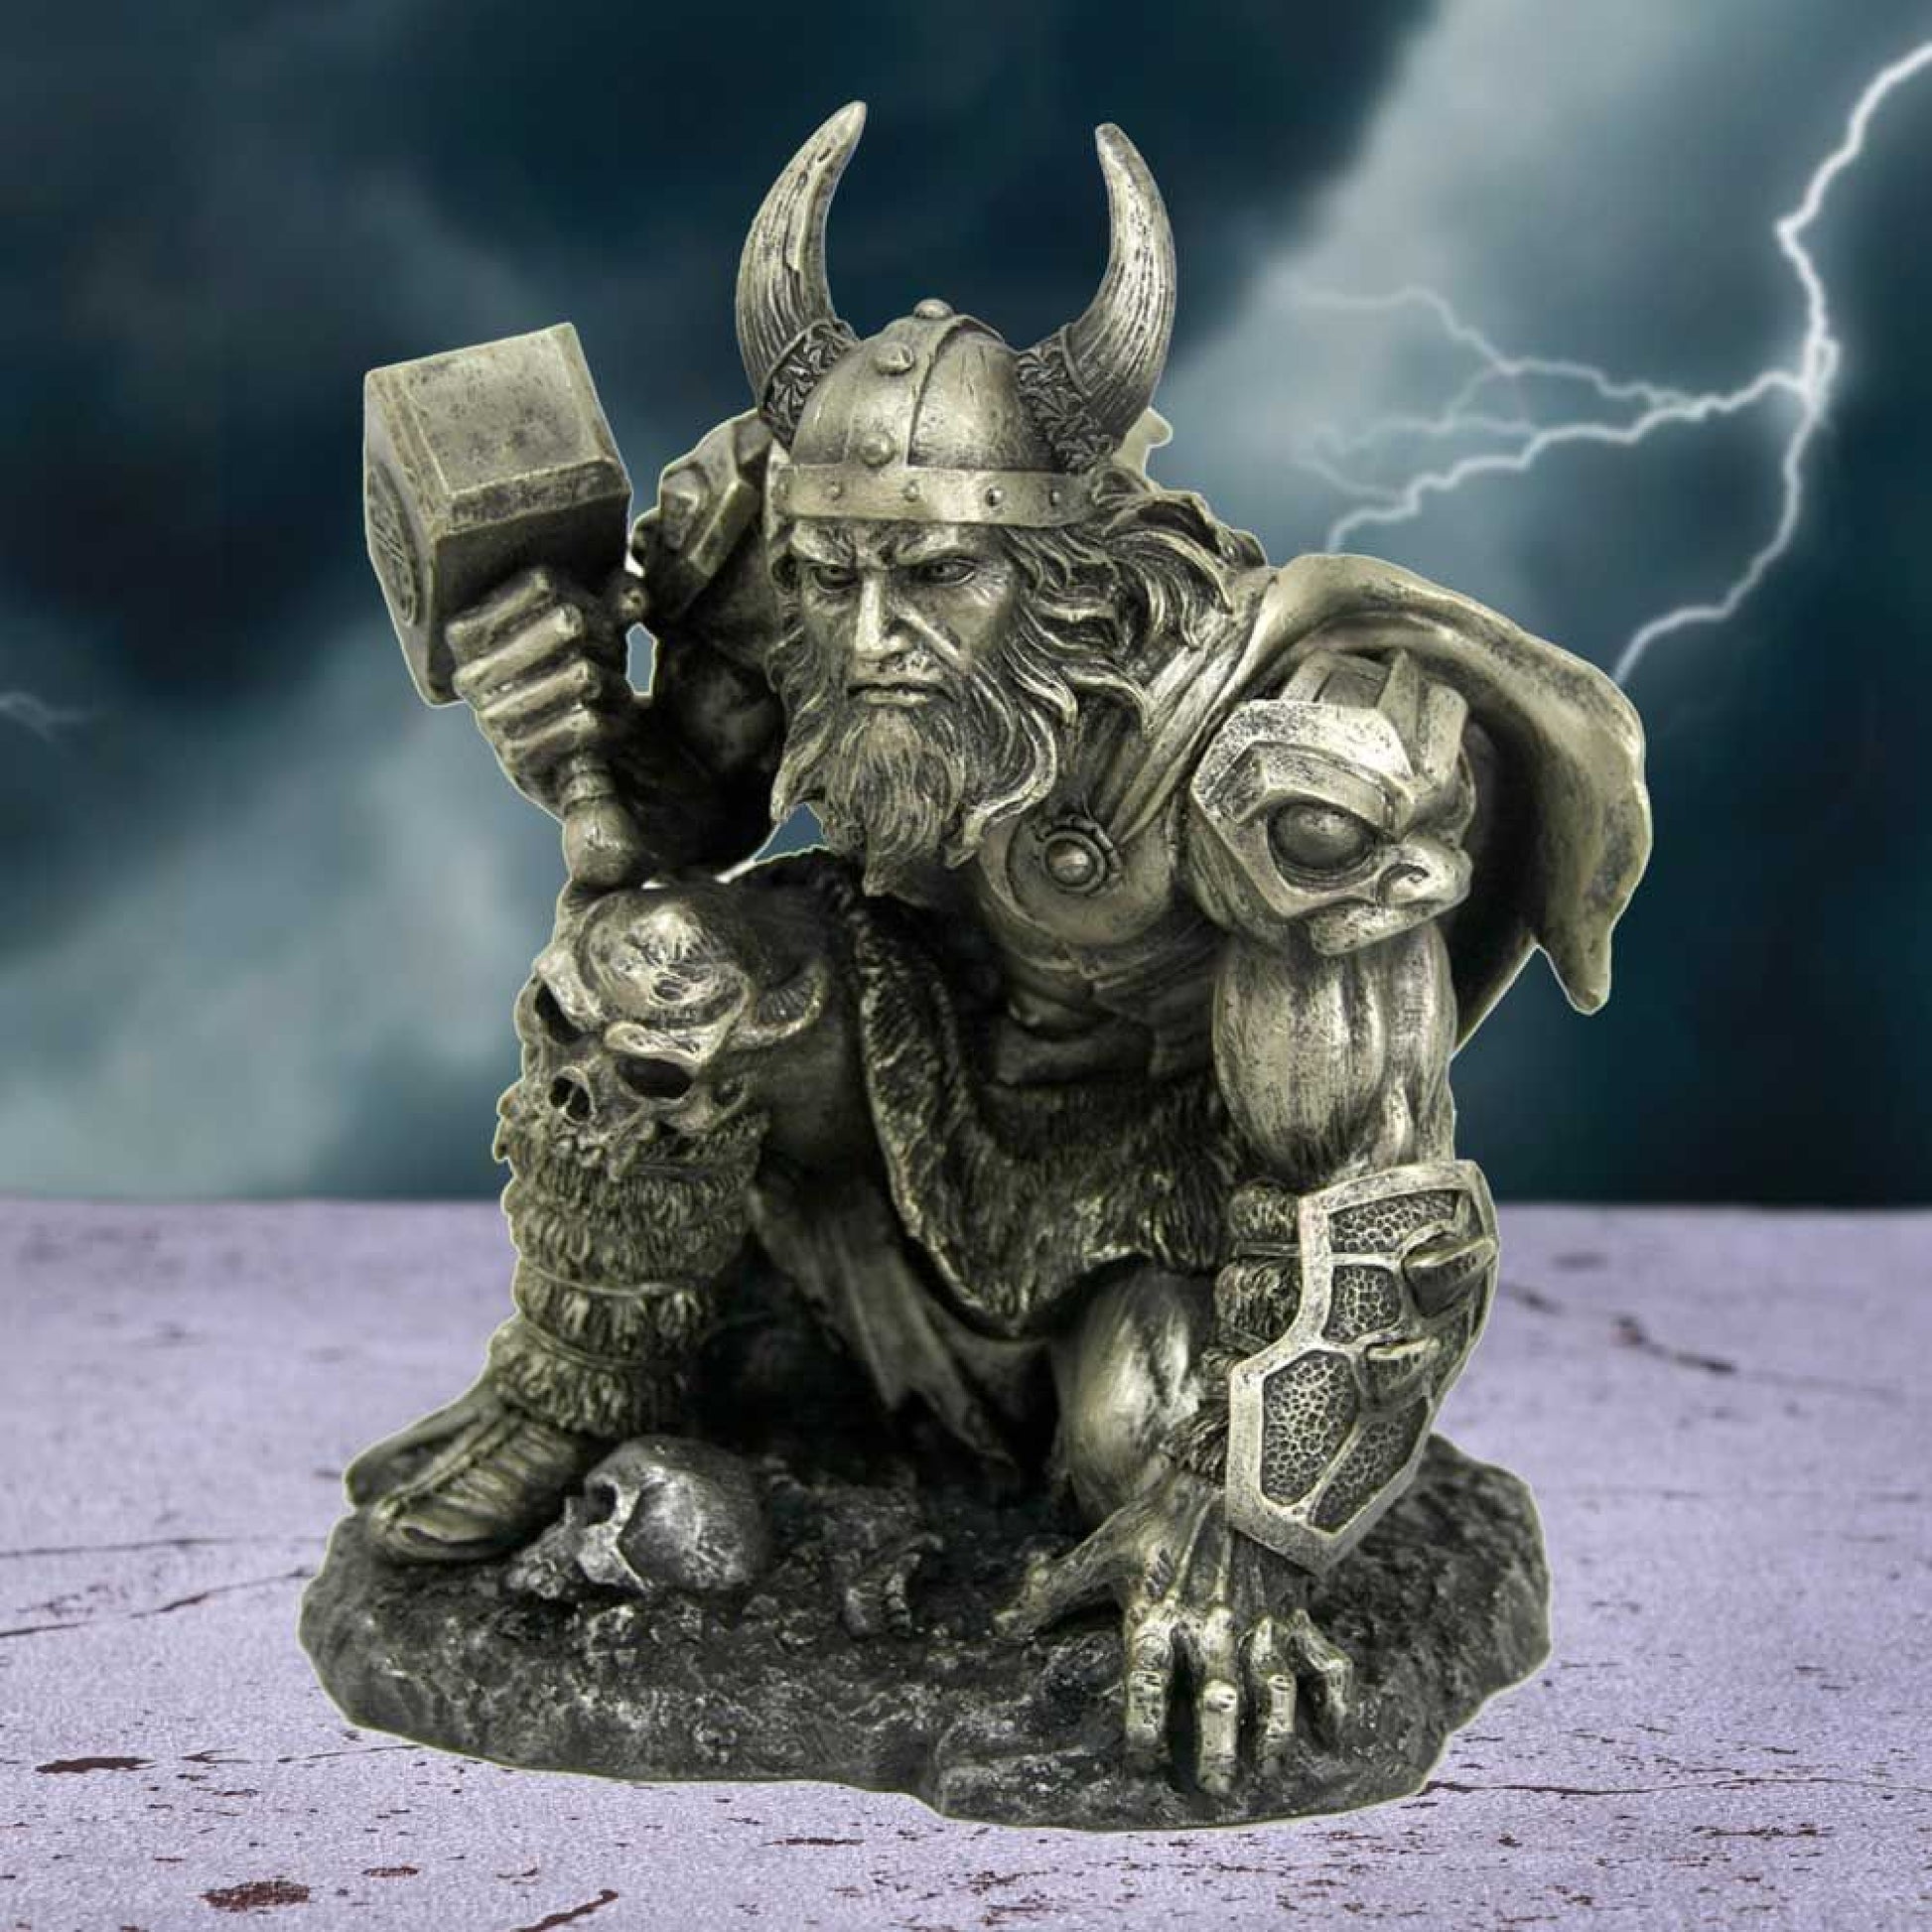 Rising from the ground, Thor, son of Odin, looks ahead of him with grim determination. Pushing himself up with his left hand, he clasps his legendary hammer, Mjolnir in his right. His armour is adorned with skulls, cape billowing behind him in the wind. On the black rocky ground by his foot, there is a single human skull.